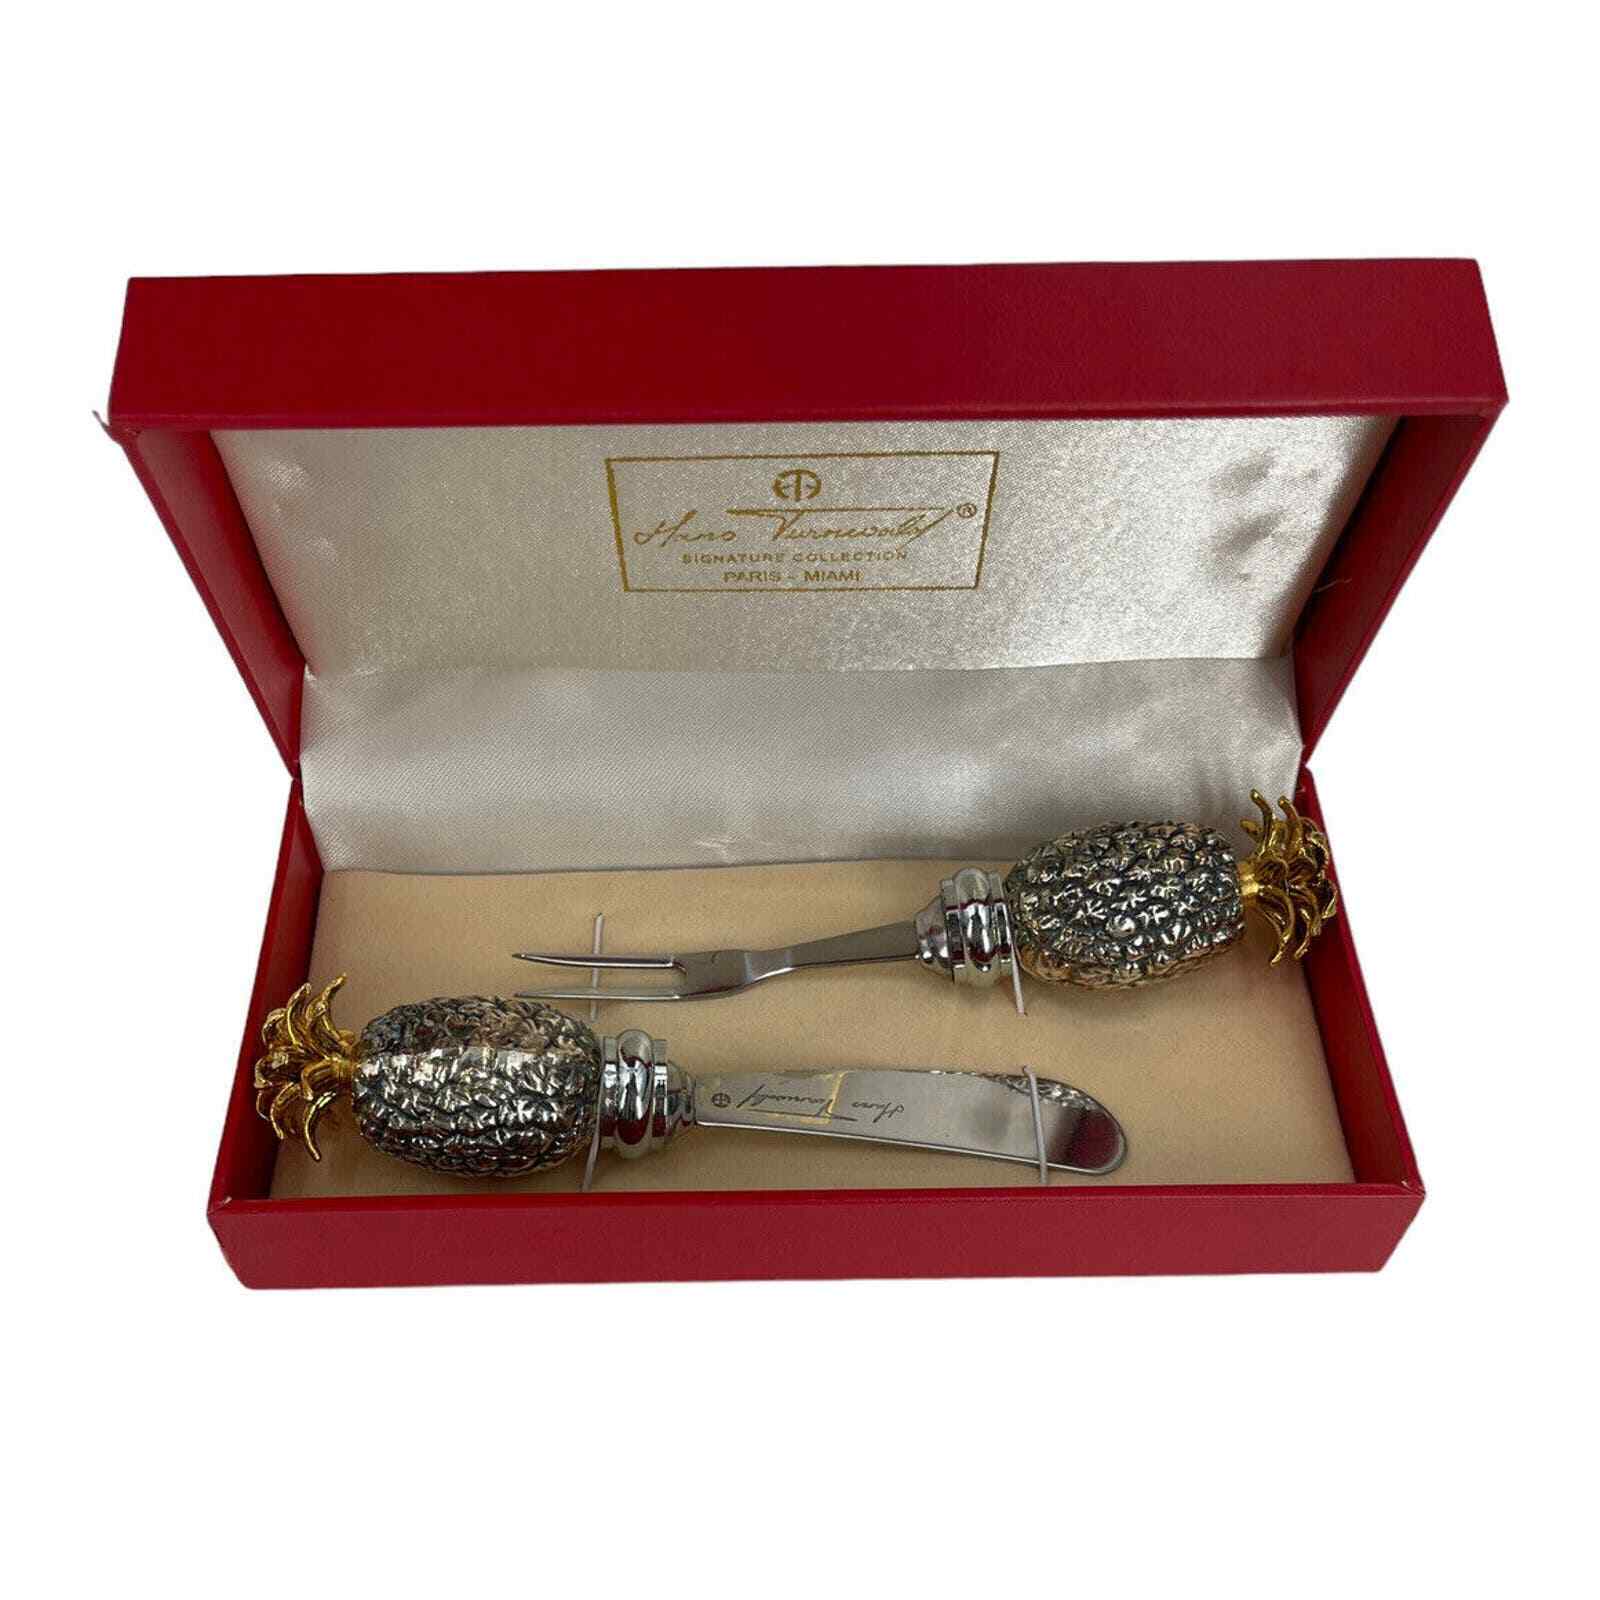 Hans Turnwald Signed Pineapple Cheese Spreader Cocktail Fork In Box